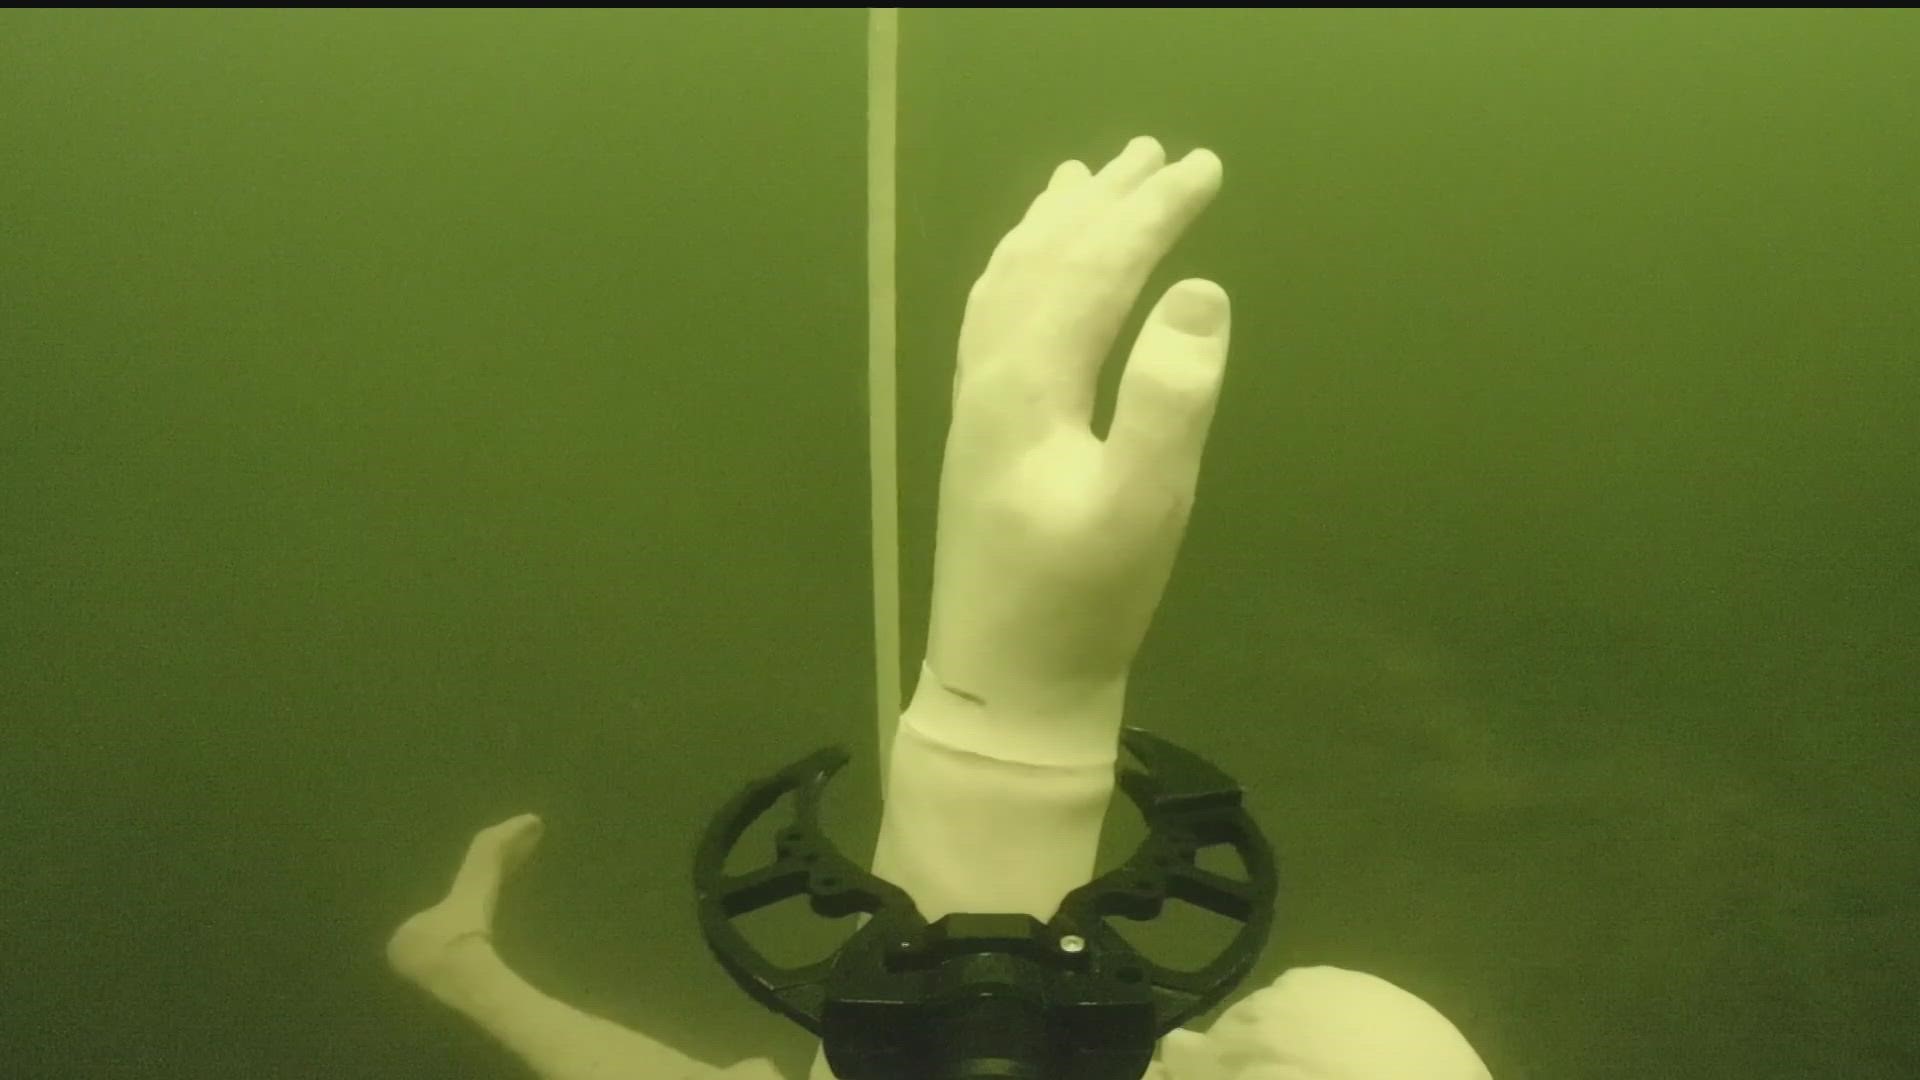 The tool, which cost around $40,000, can be thought of as a water drone.